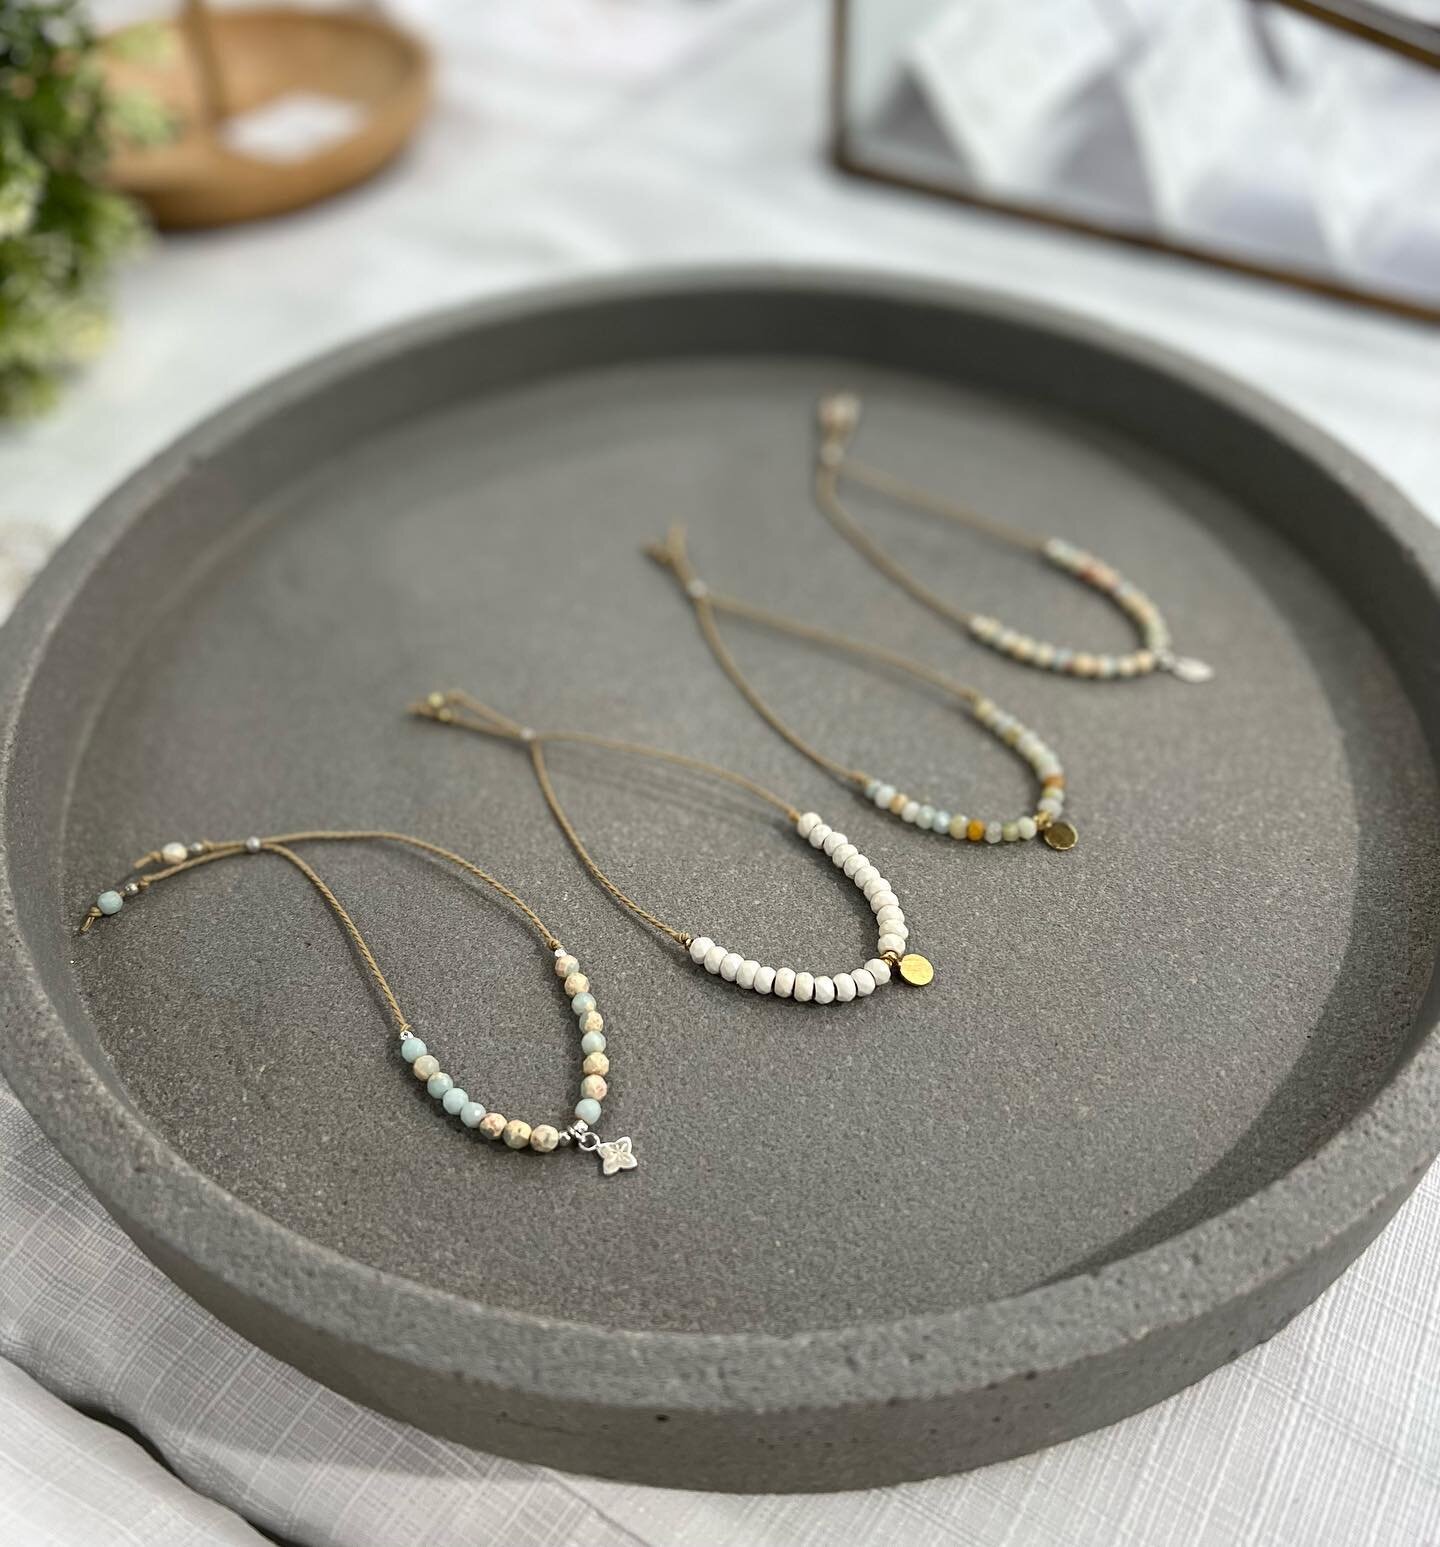 Definite new favs!
Sold heaps of these lovelies. Adjustable bracelets featuring sterling silver or yellow gold, inspired by recently created matching necklaces.
#semipreciousjewellery #adjustablenecklace #sterlingsilvercharm #goldcharm #bohostyle #ha